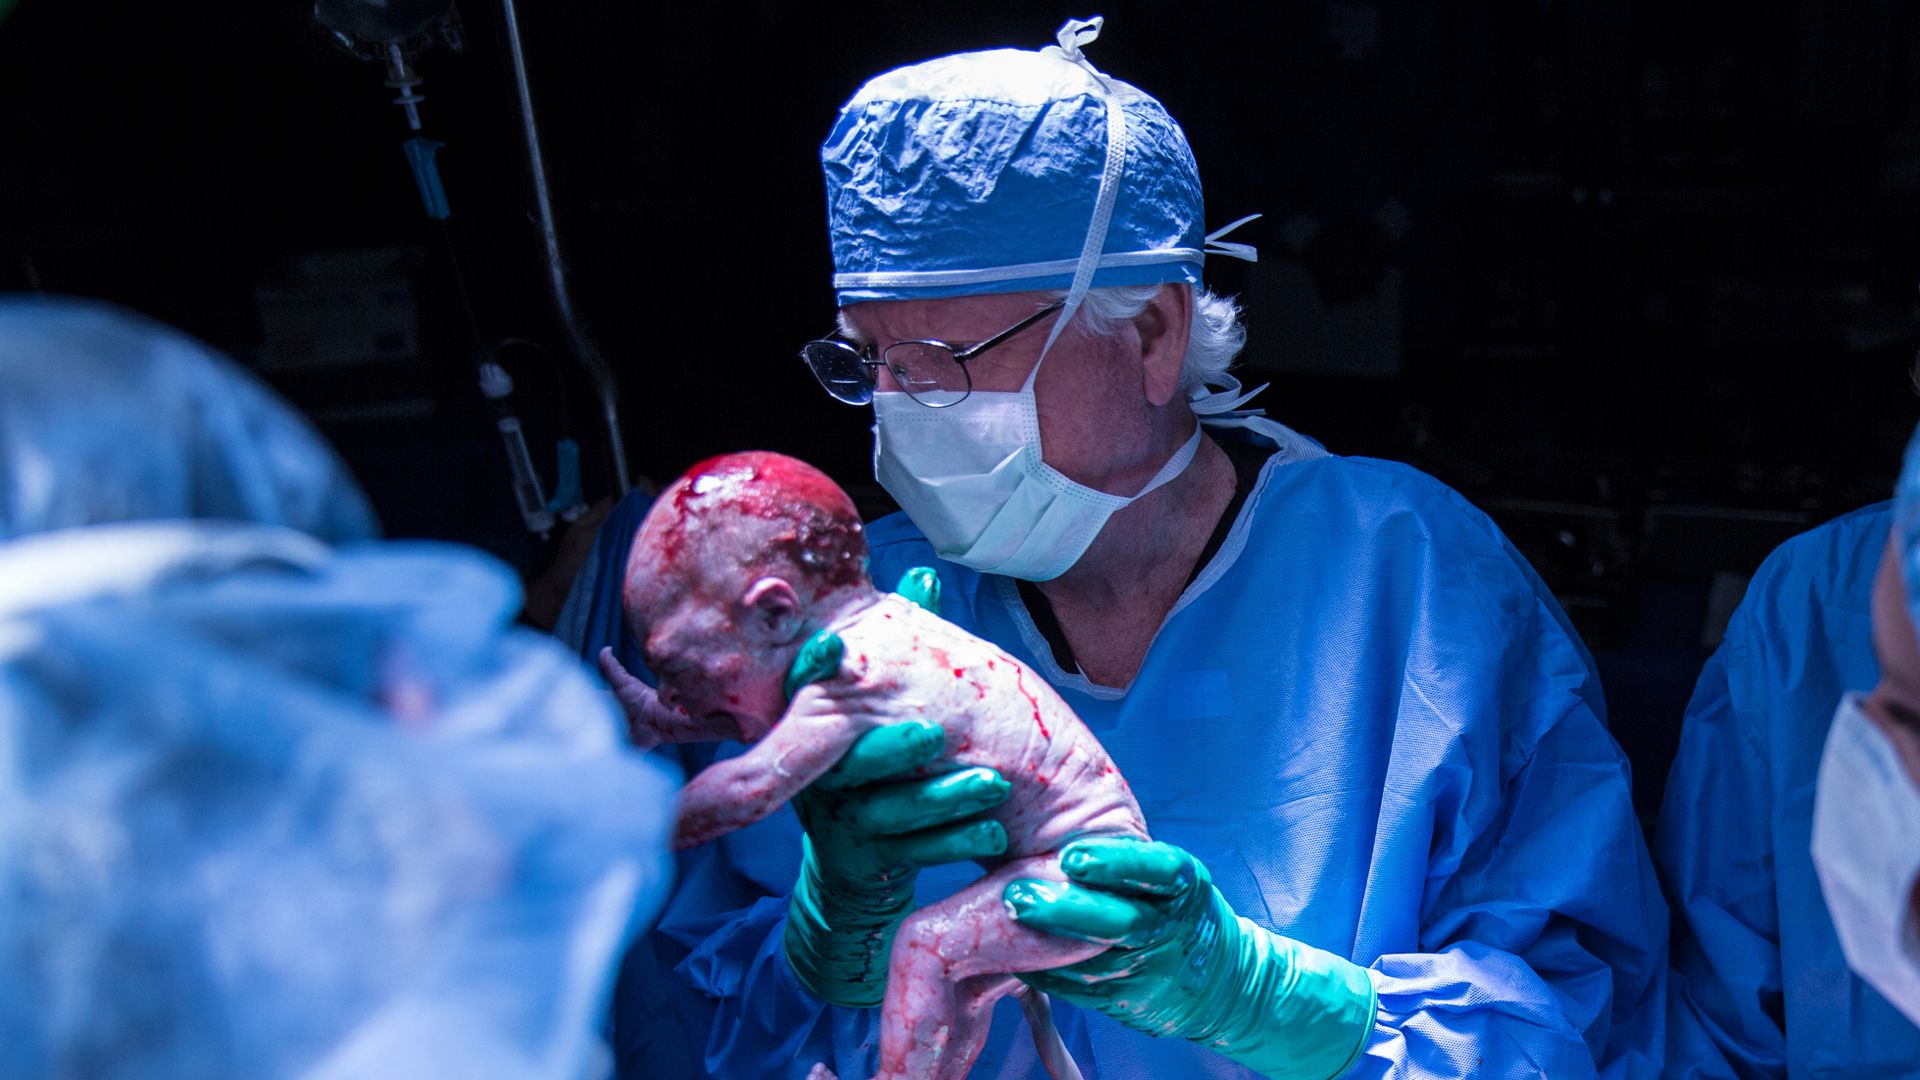 The delivery of a baby born to a woman who received a uterus transplant at Baylor University Medical Center.